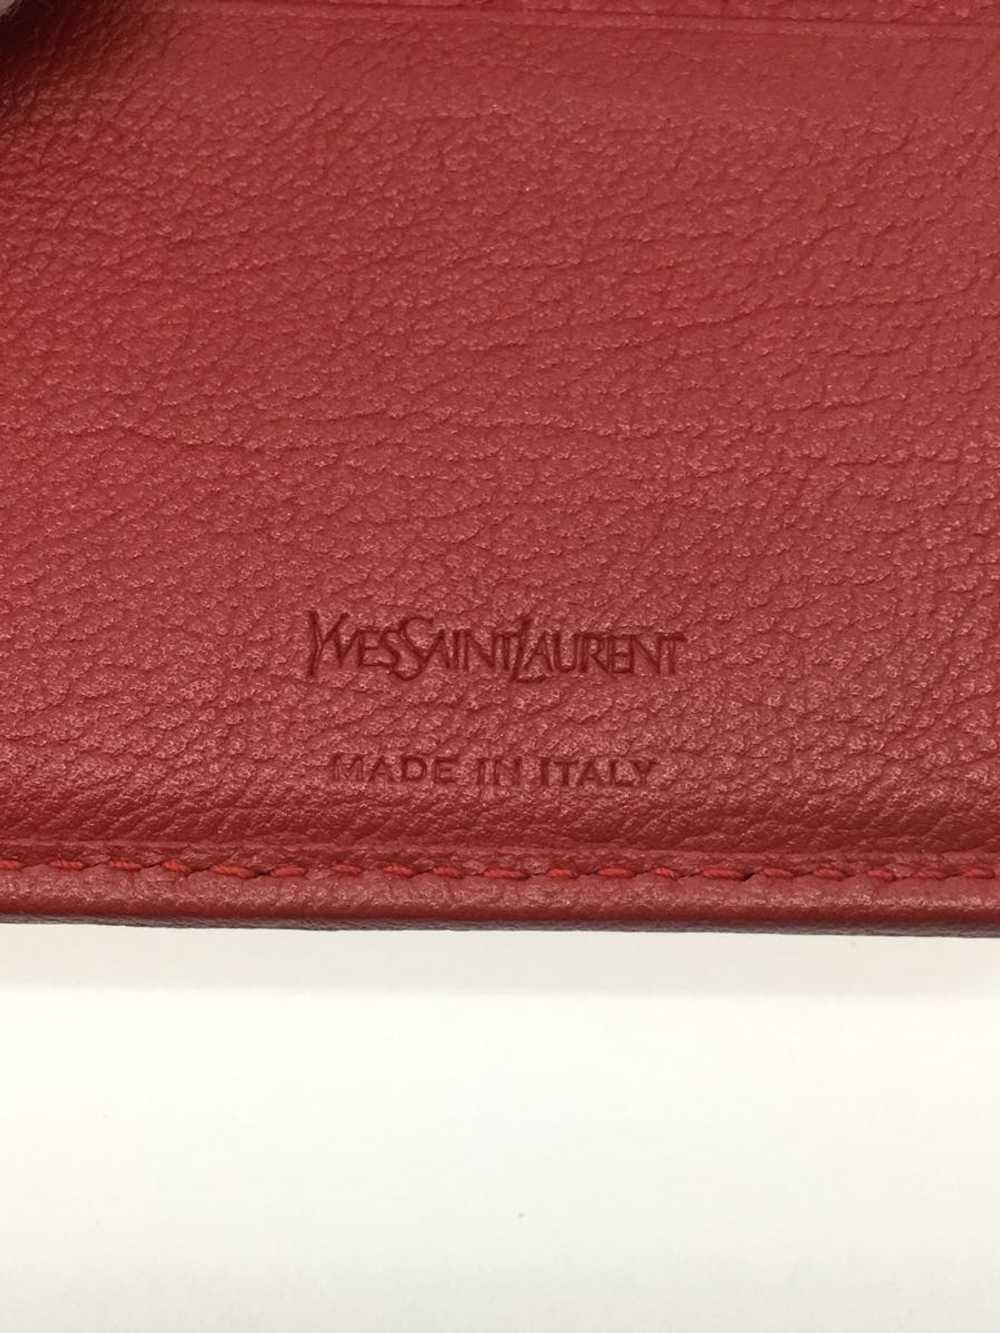 Yves Saint Laurent Bifold Wallet Leather Red Plai… - image 3